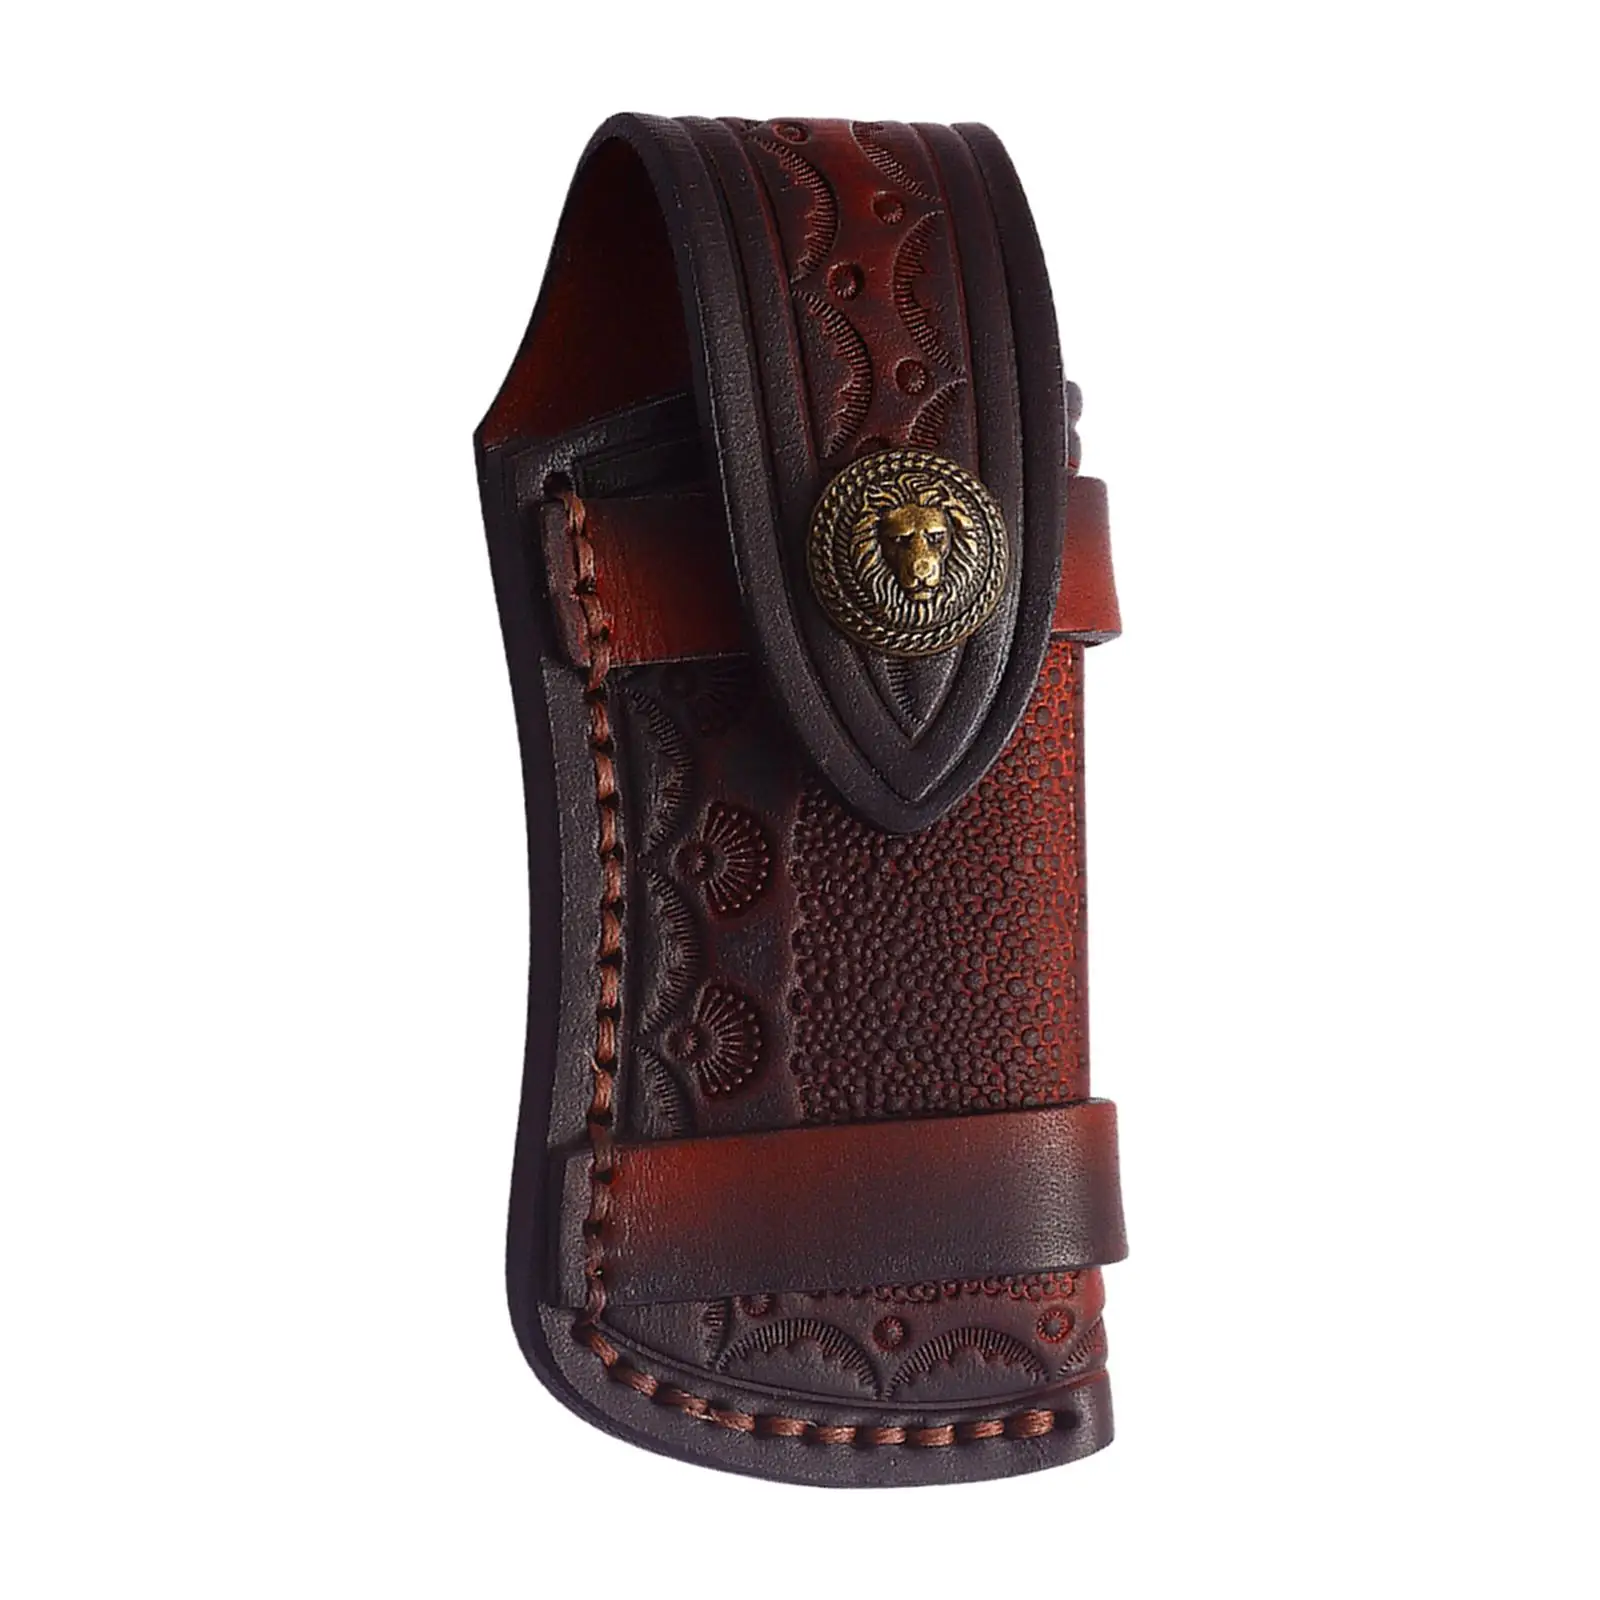 Leather Sheath for Folding Knife Protective Case Knife Pouch Knife Cover